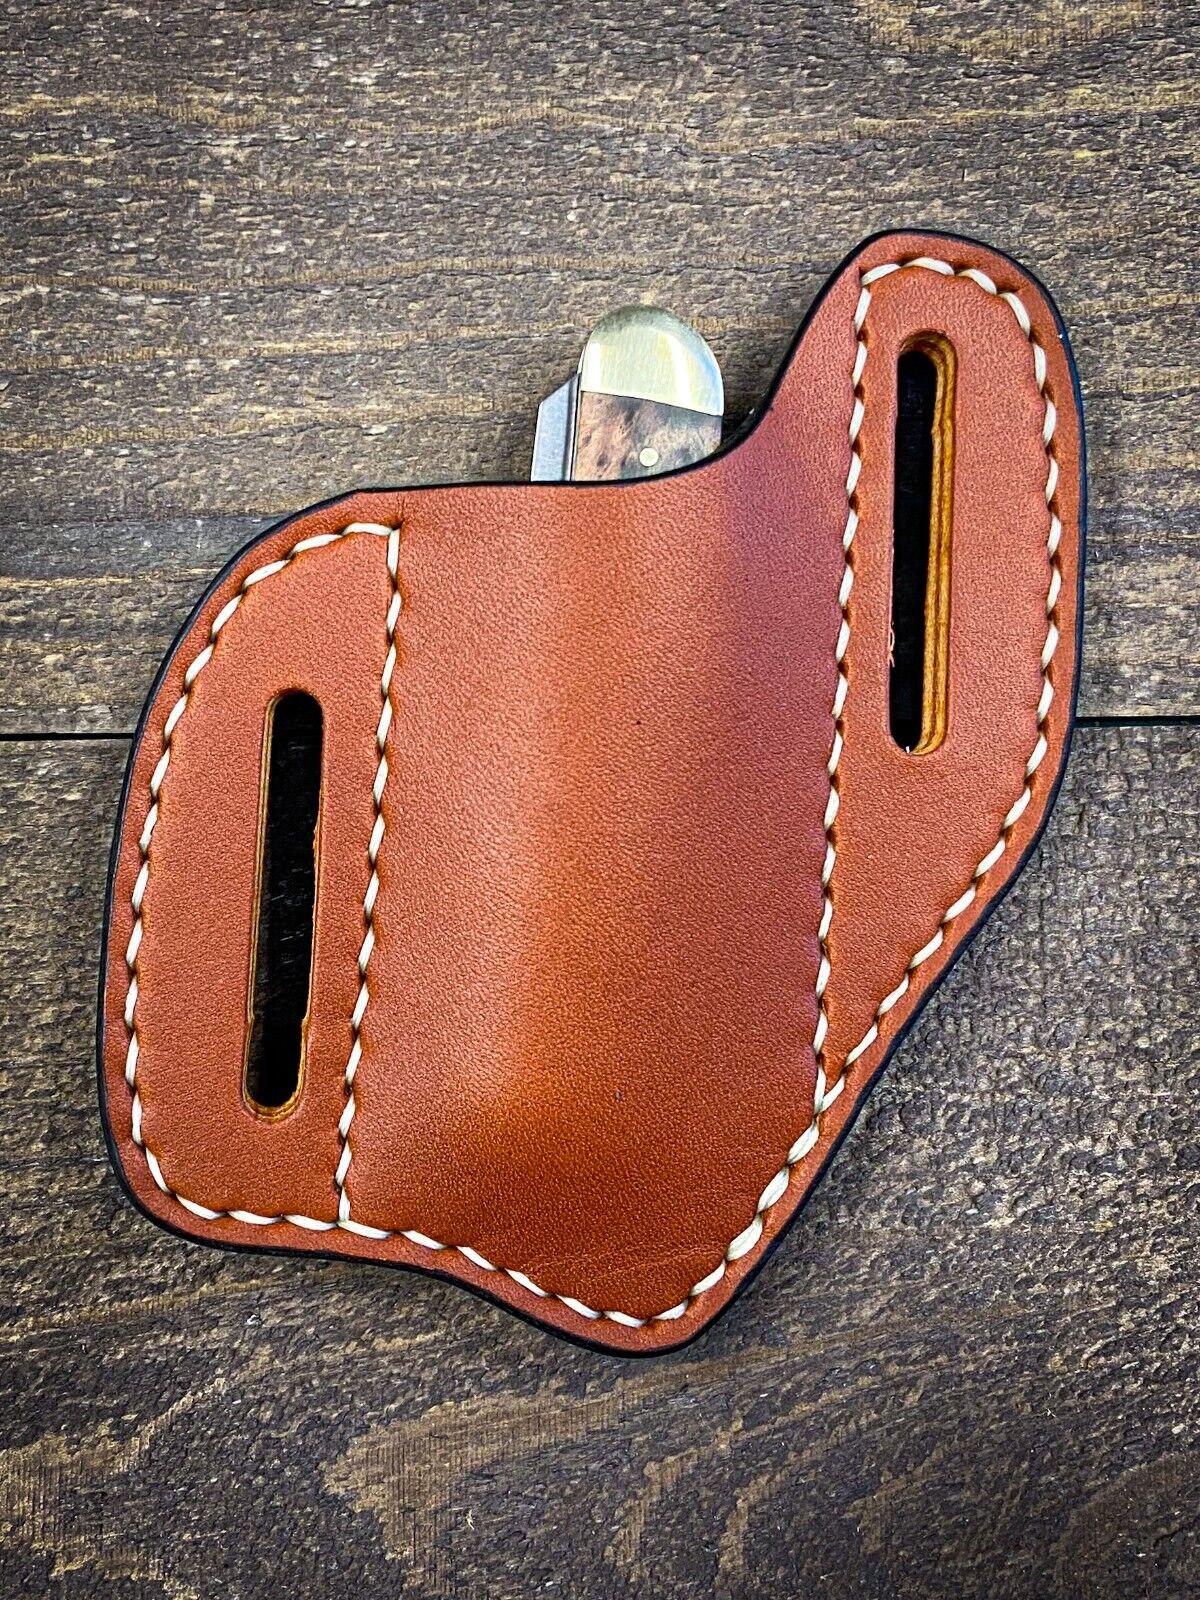 Custom leather pancake sheath holster for Buck Trapper Case Stockman USA made